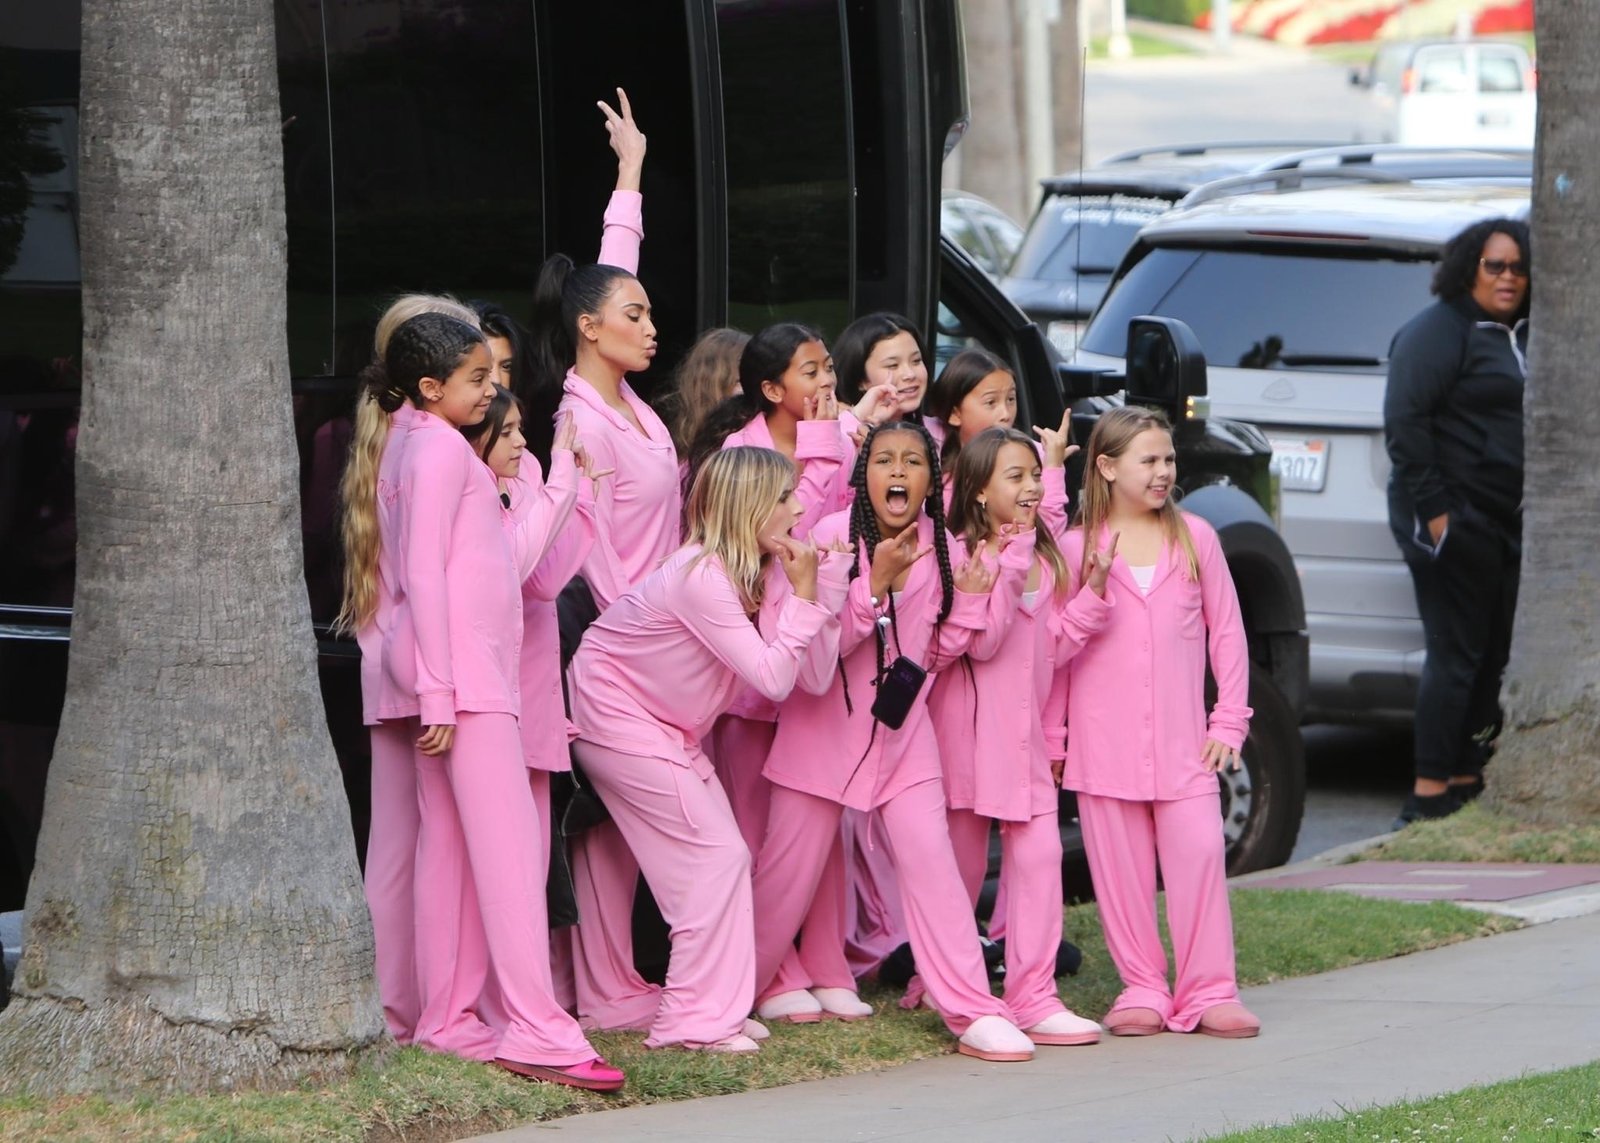 Kim Kardashian's daughter North West and her friends